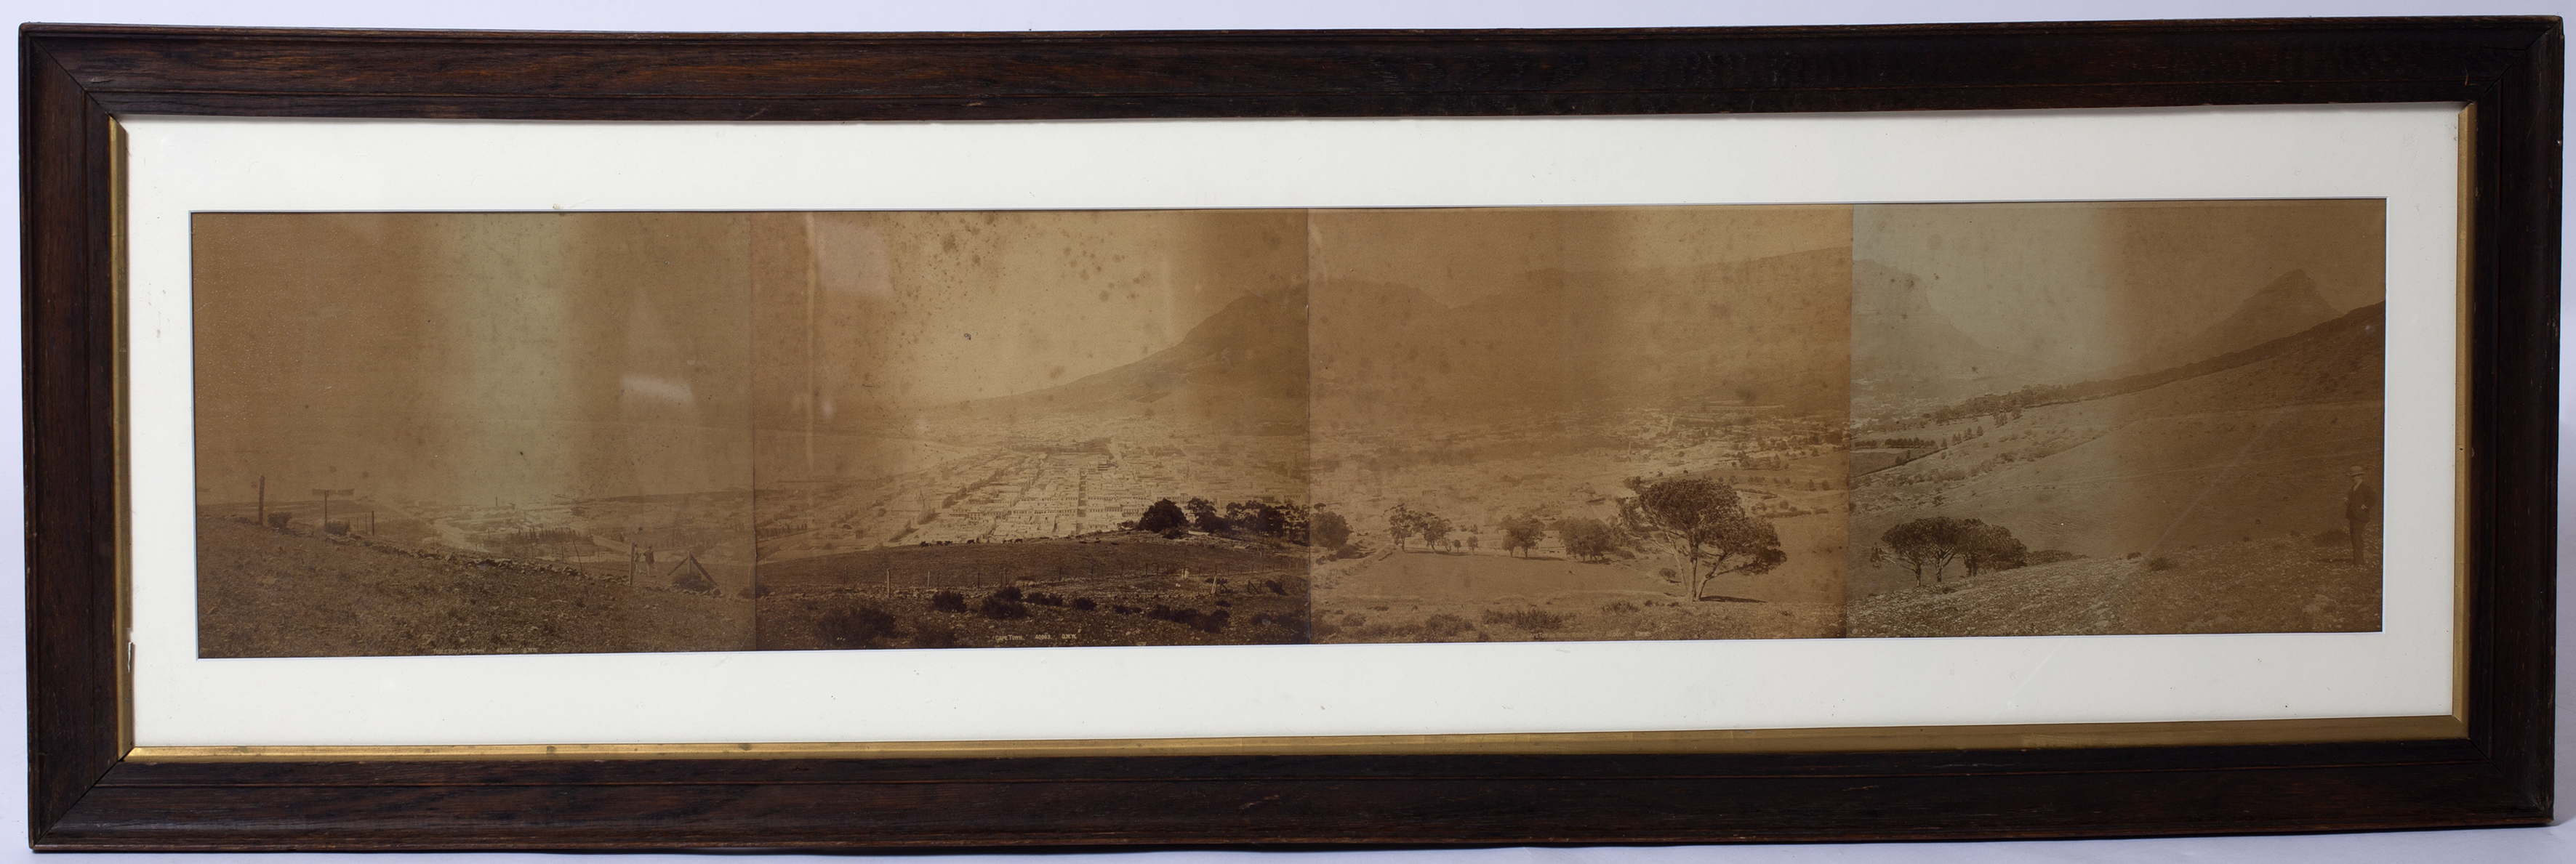 A panoramic framed photograph view of Cape Town c1900, four images glued down and framed, 112 x - Image 3 of 4